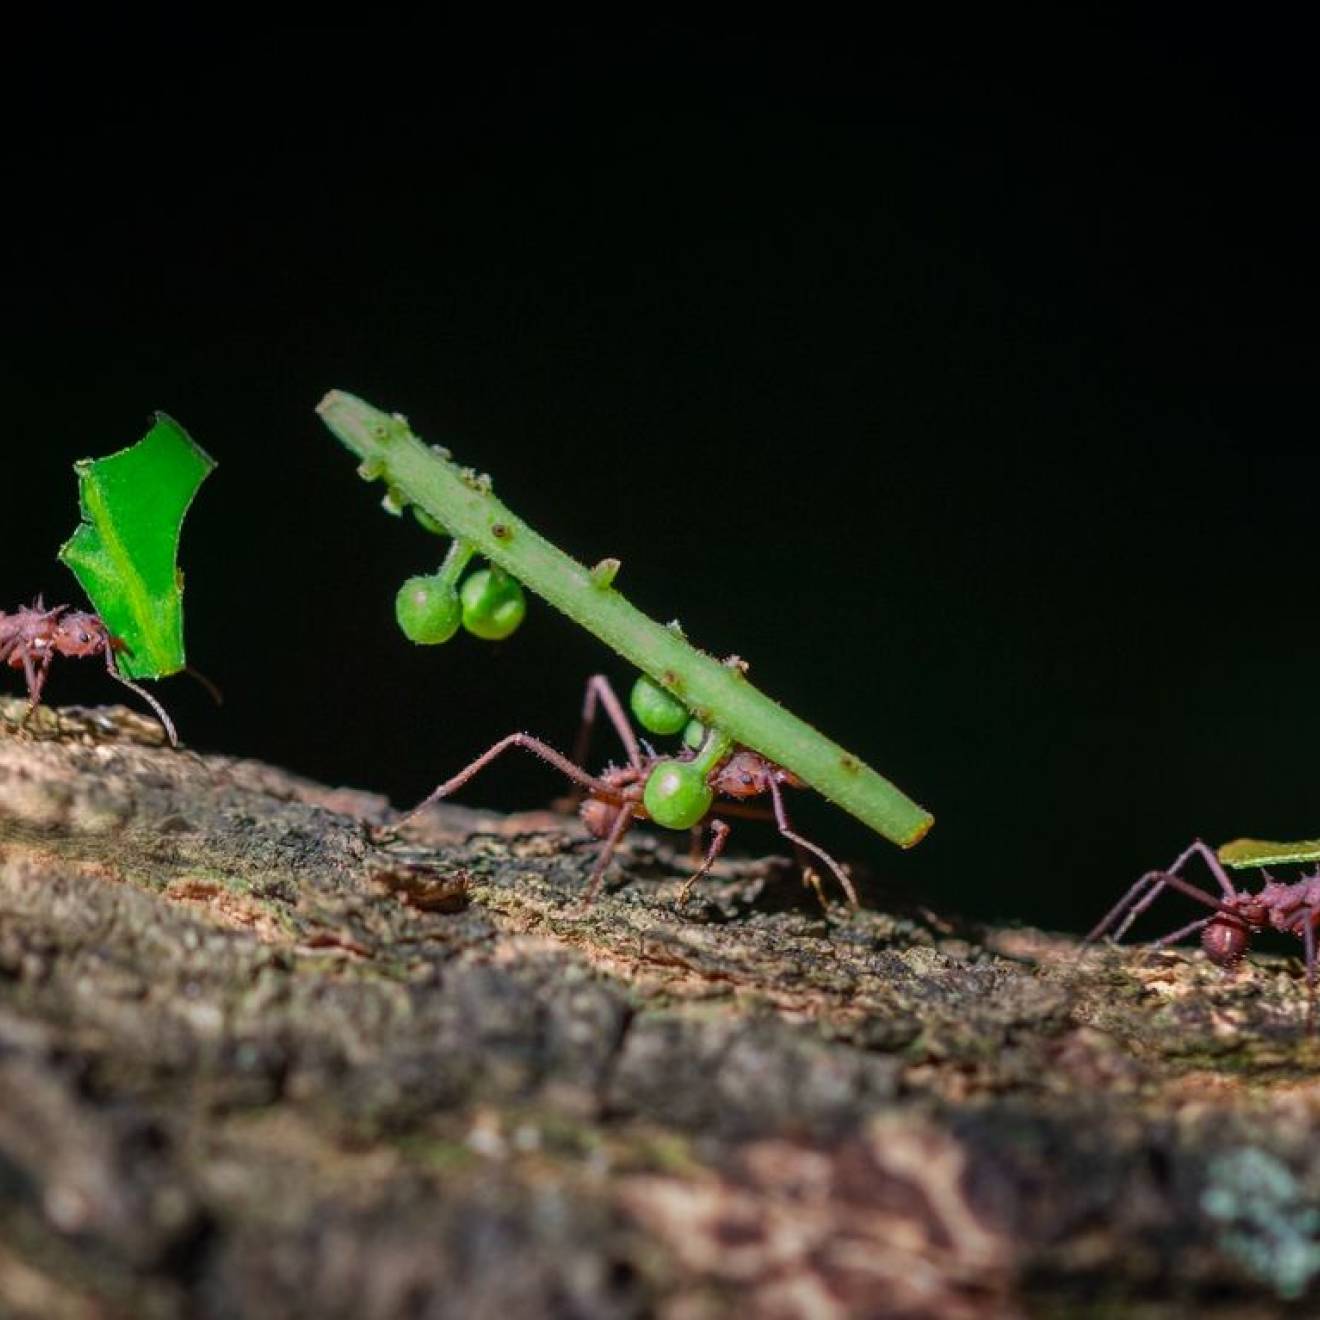 Three ants carrying green leaves and sticks along sloped dirt with a dark background